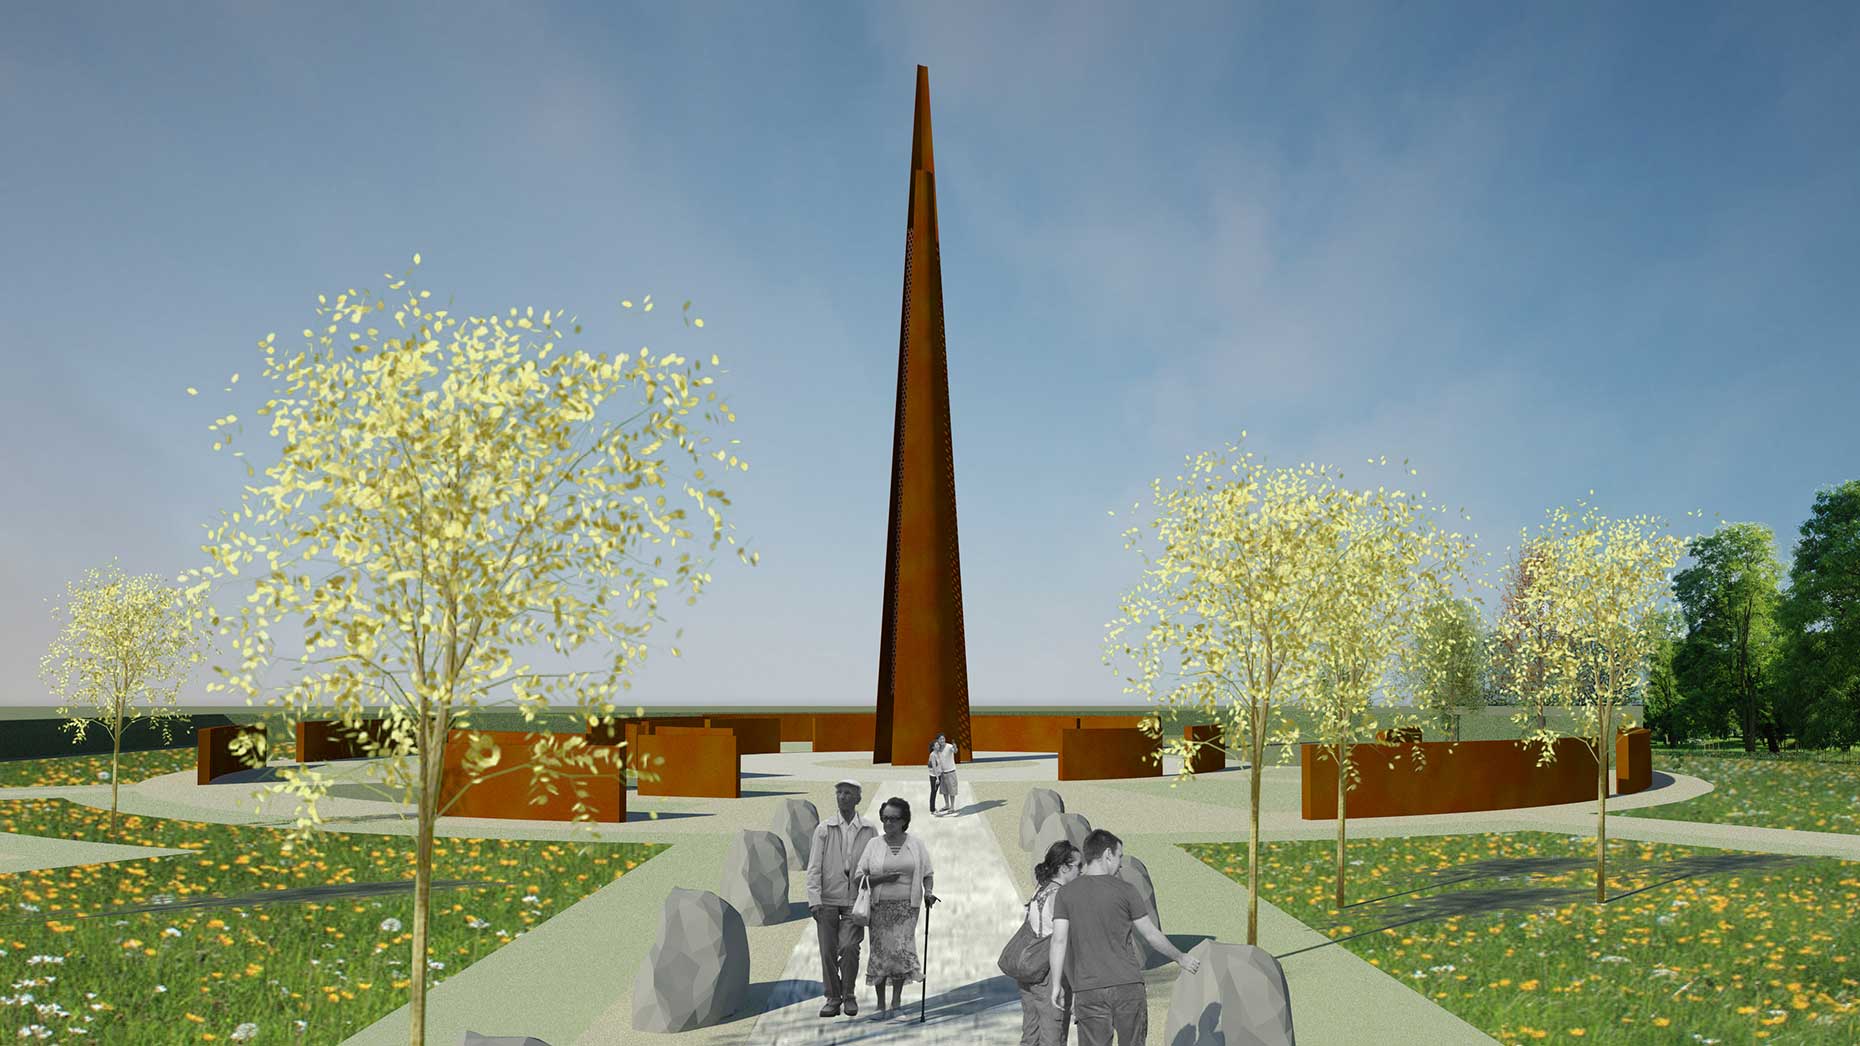 The new Memorial Spire will not have names on it, but on walls around it.